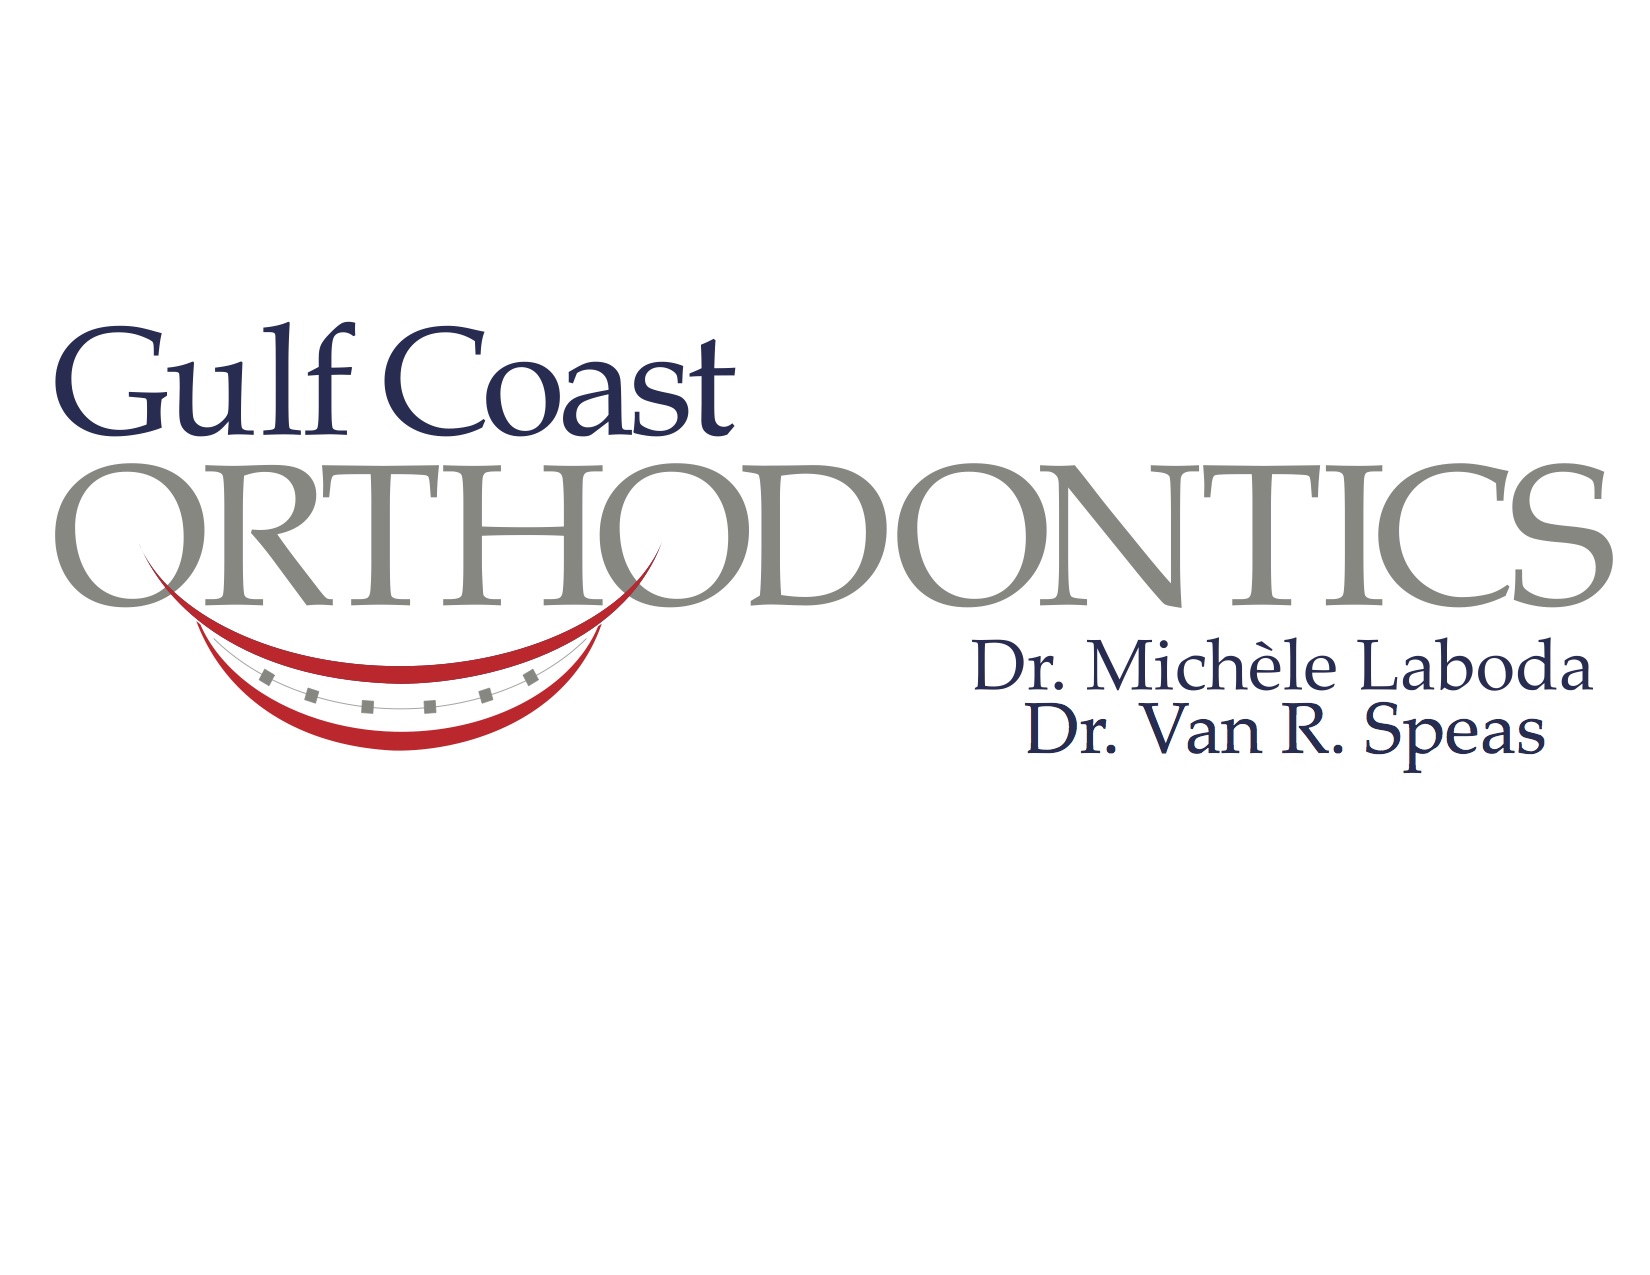 To celebrate National Children’s Dental Health Month, Gulf Coast Orthodontics encourages early preventative care